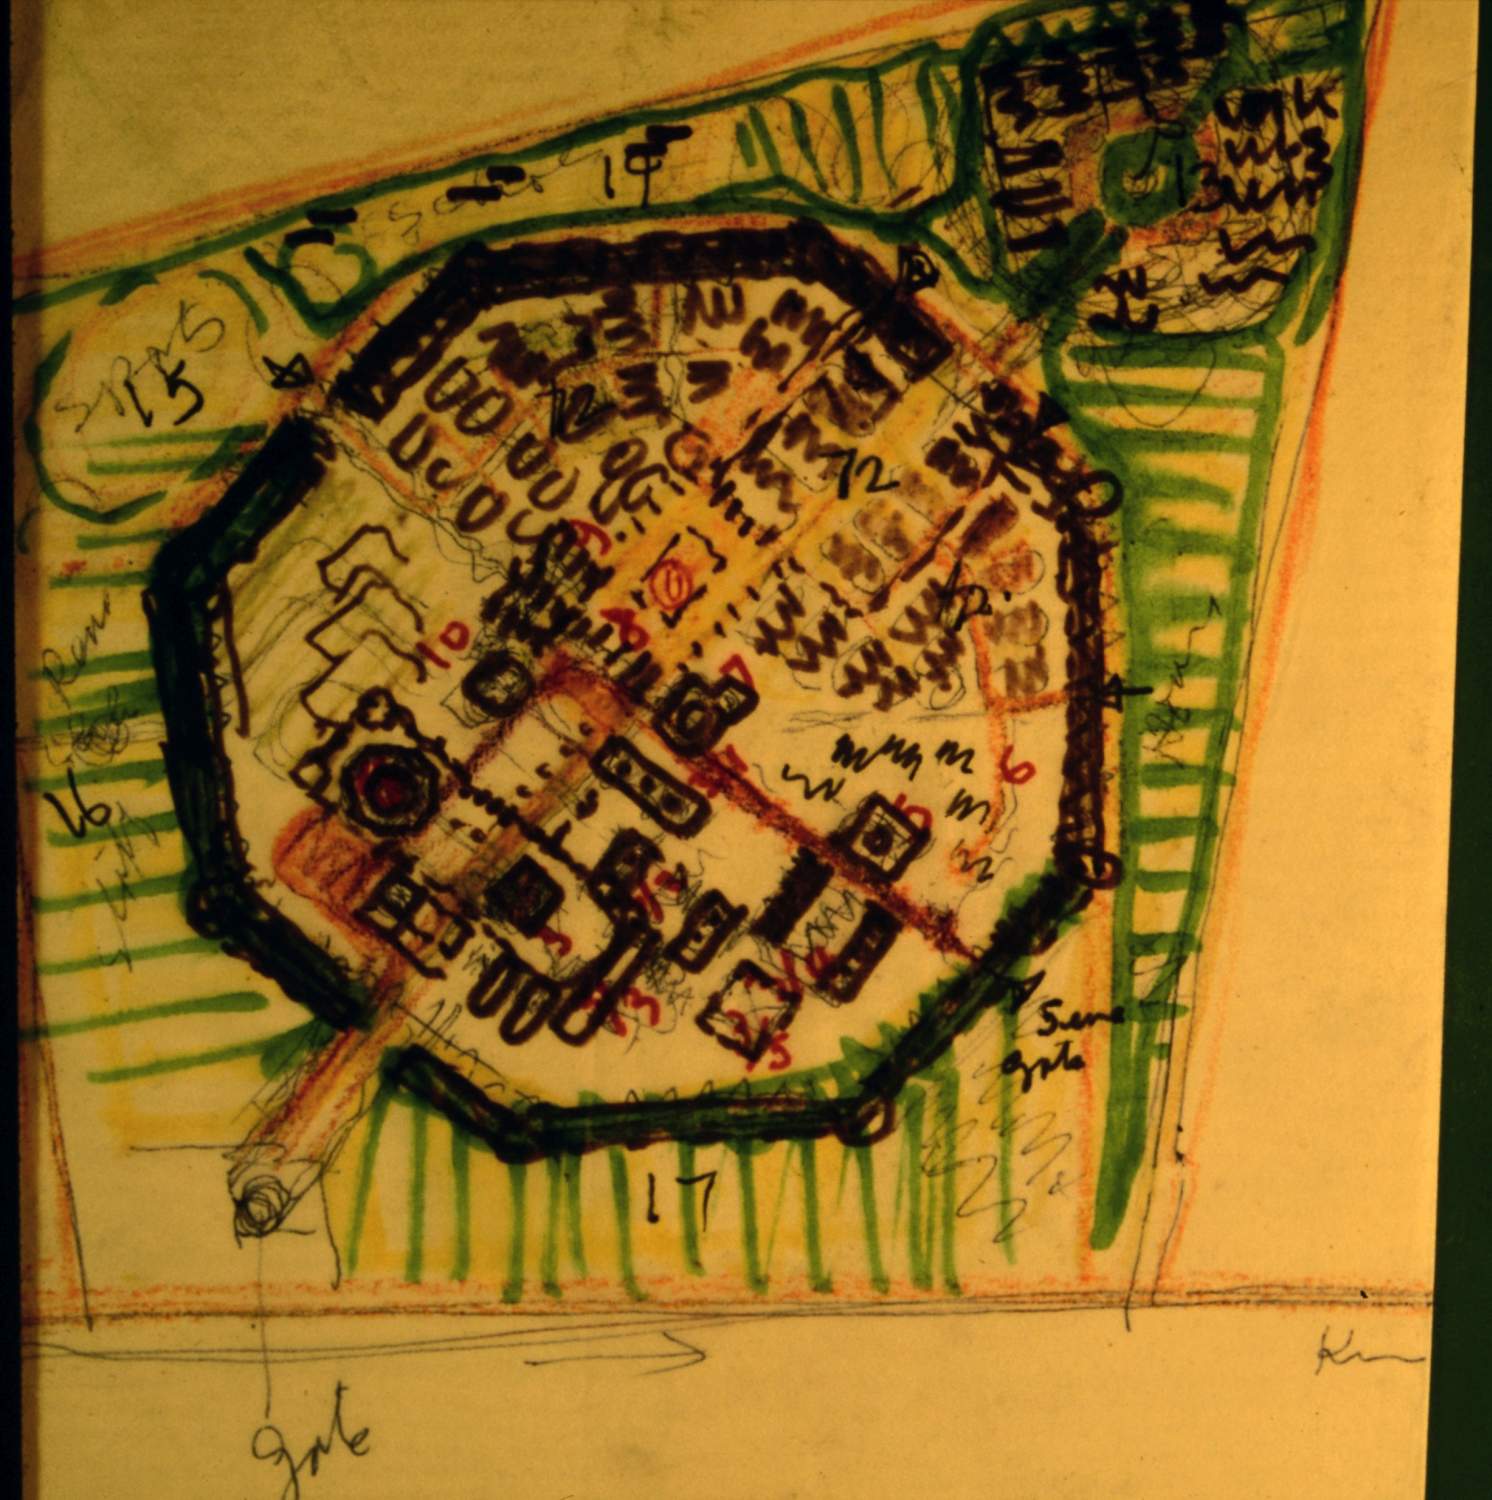 One of several preliminary sketches showing site plan for the university campus.